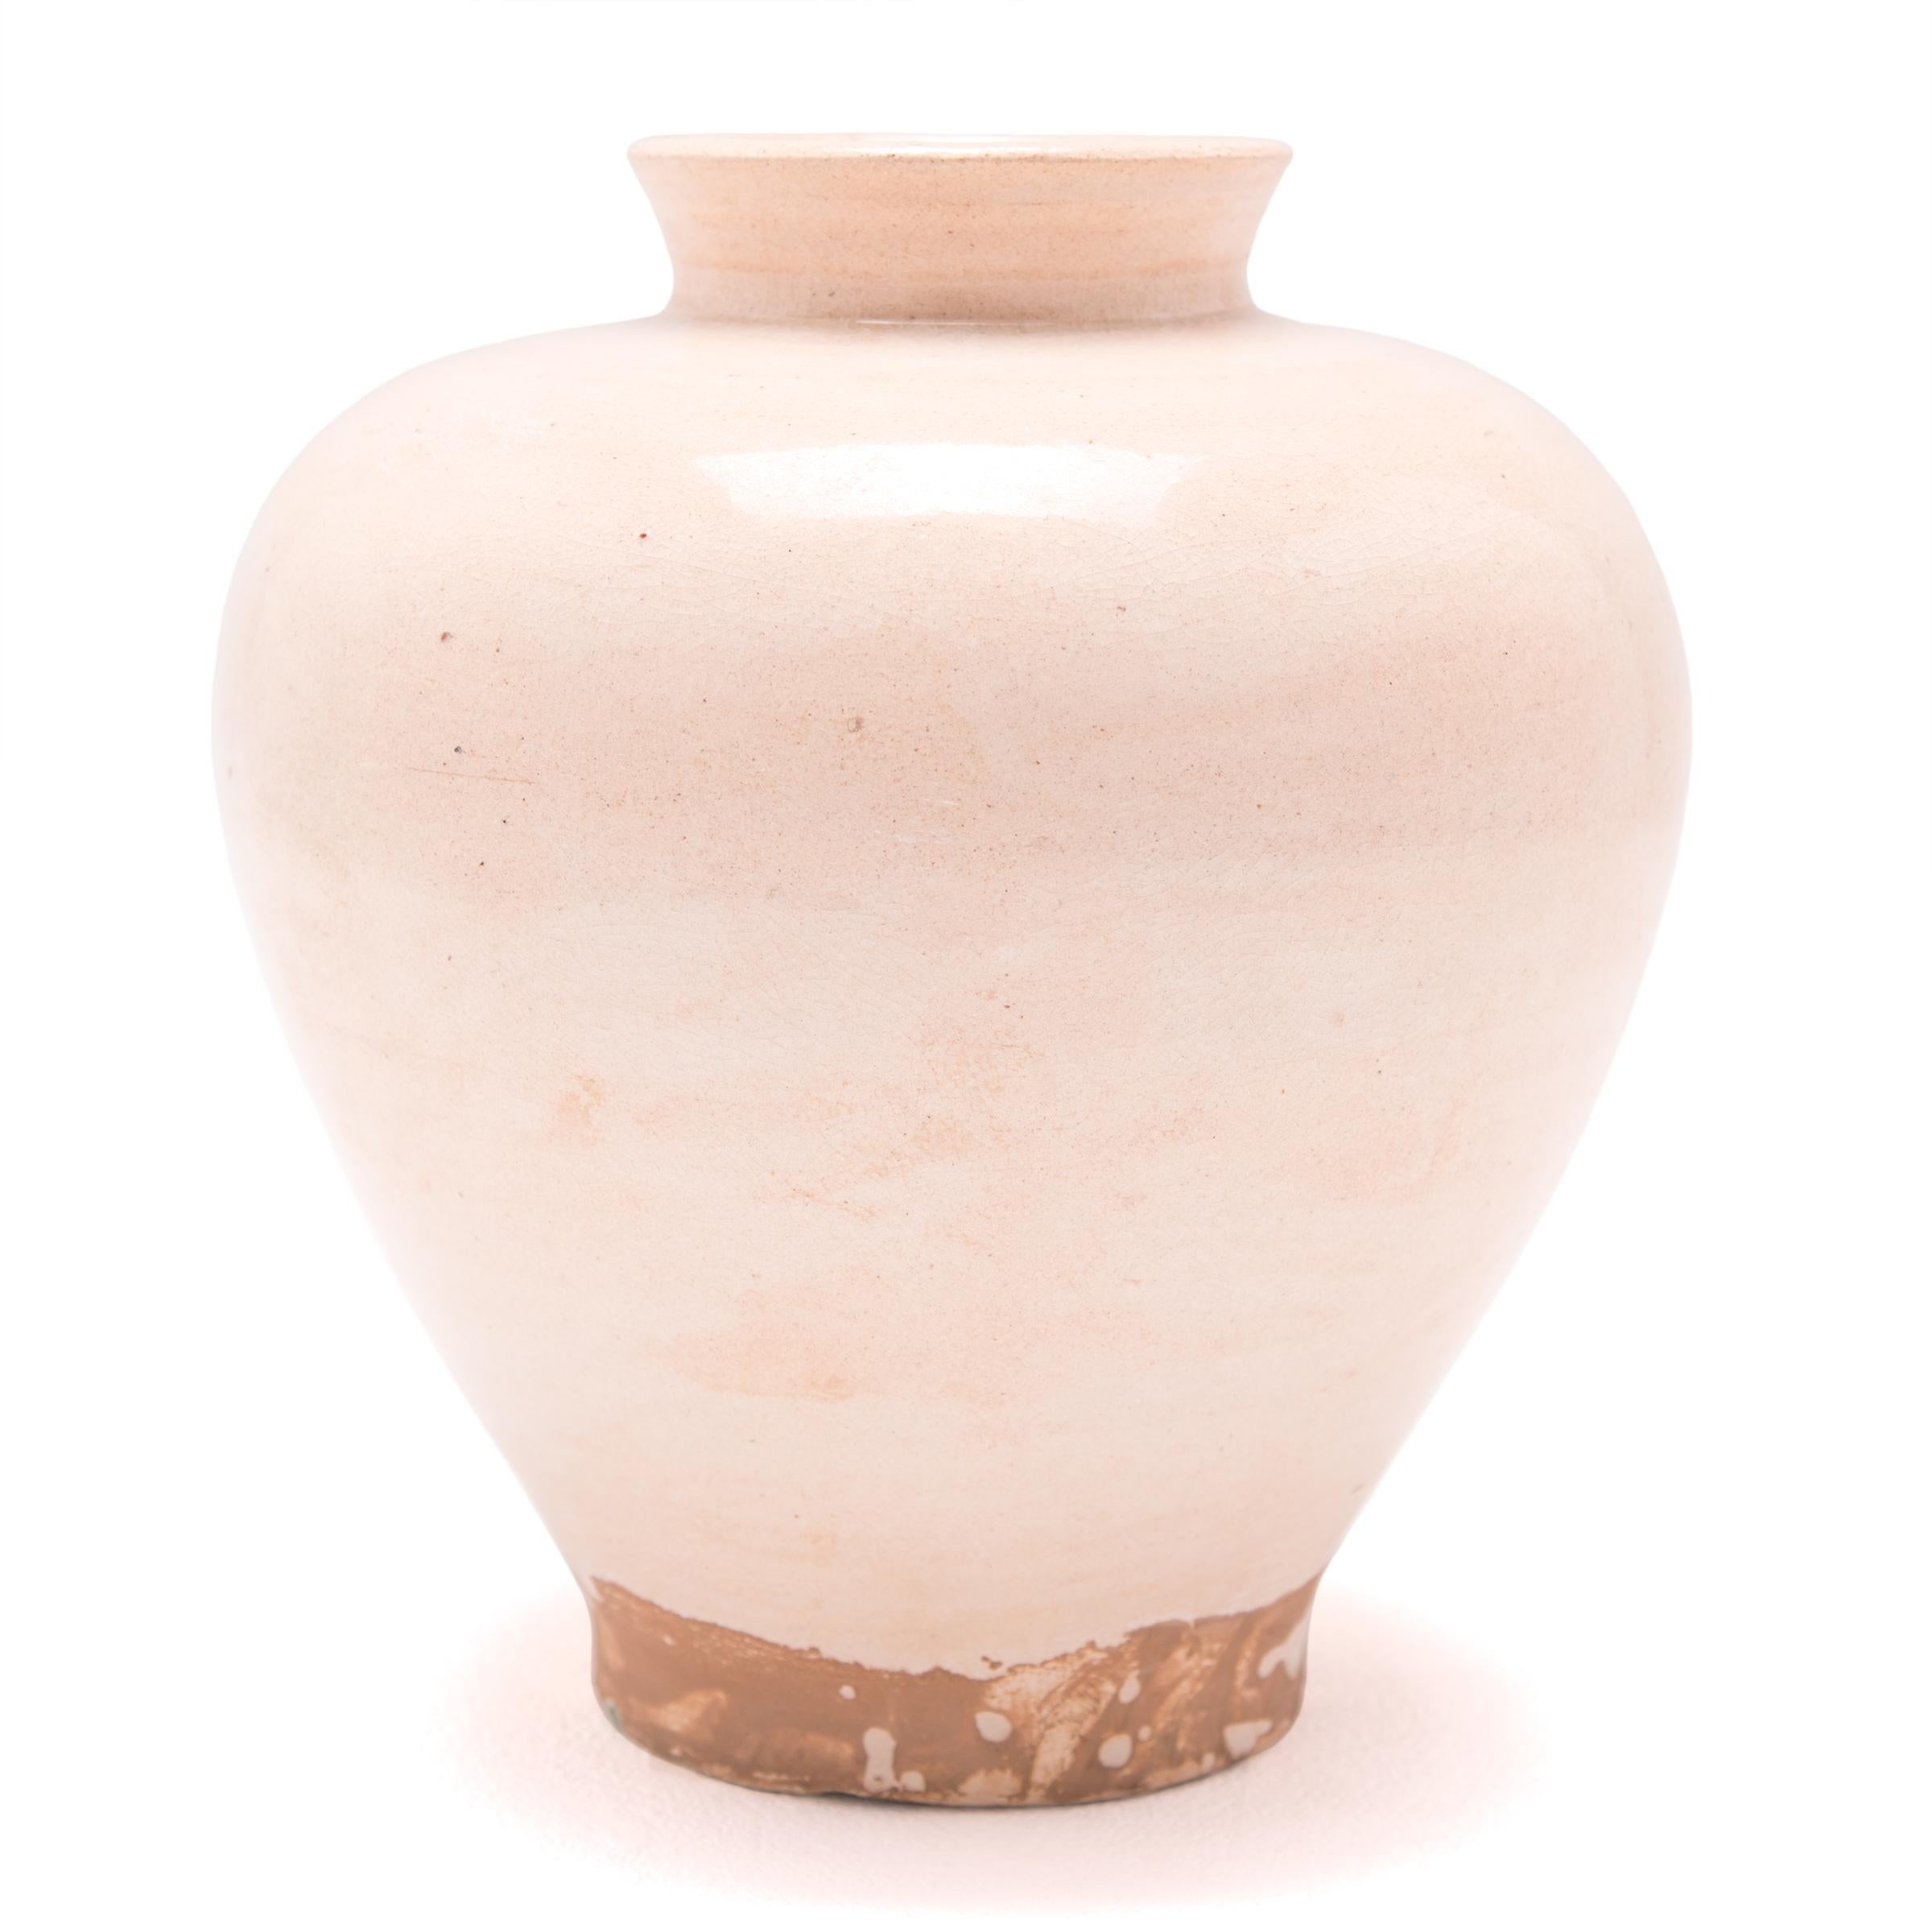 A cream-colored glaze emphasizes the sculptural form of this contemporary version of a traditional Chinese wine vessel. Refining its classic tapered curves, the jar’s monochromatic look draws attention to its elegant silhouette. Featuring an